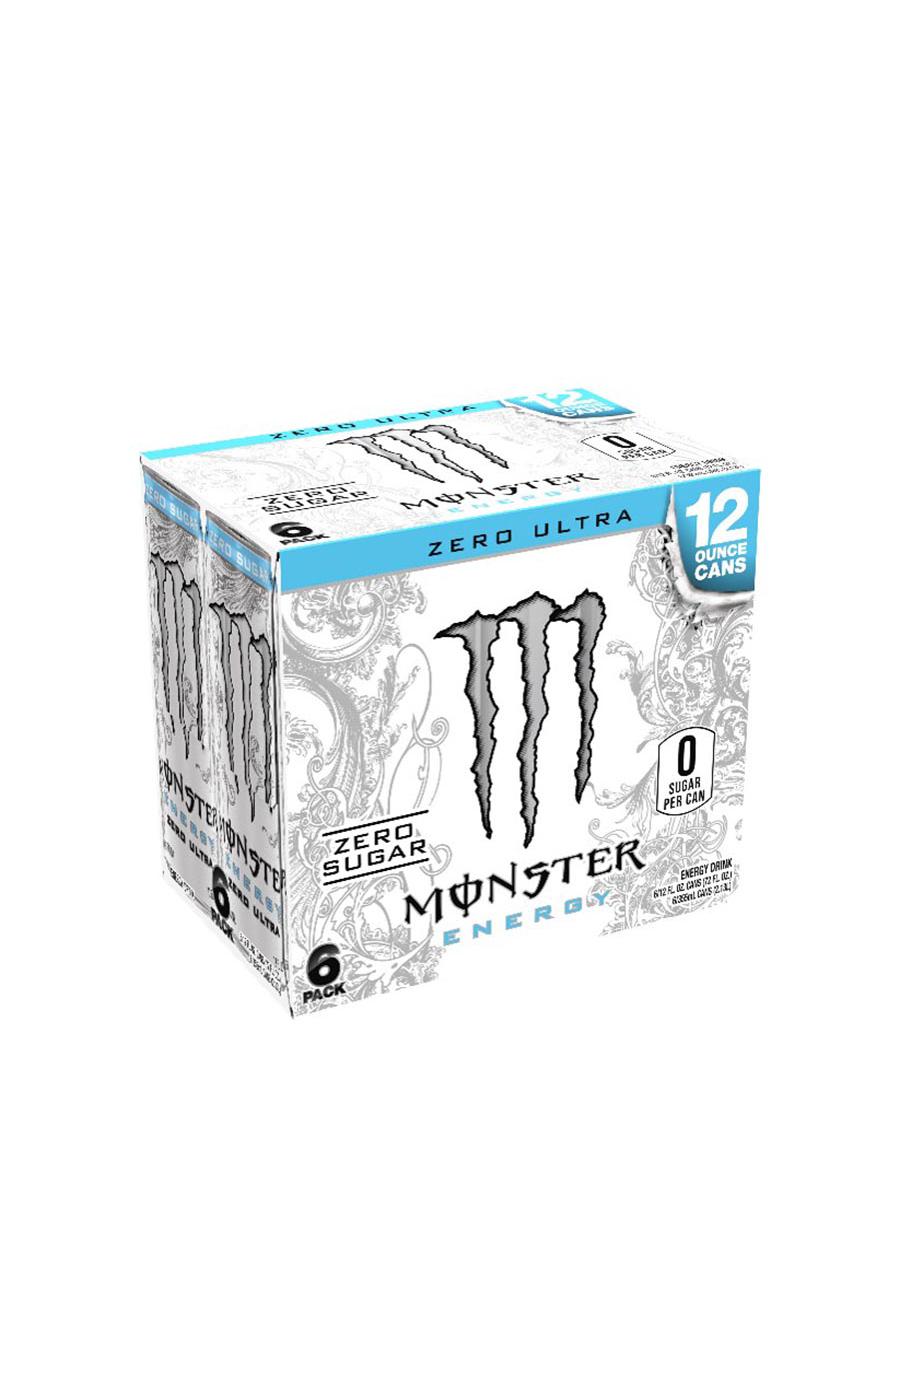 Monster Energy Zero Ultra Sugar Free Energy Drink 12 oz Cans; image 2 of 3